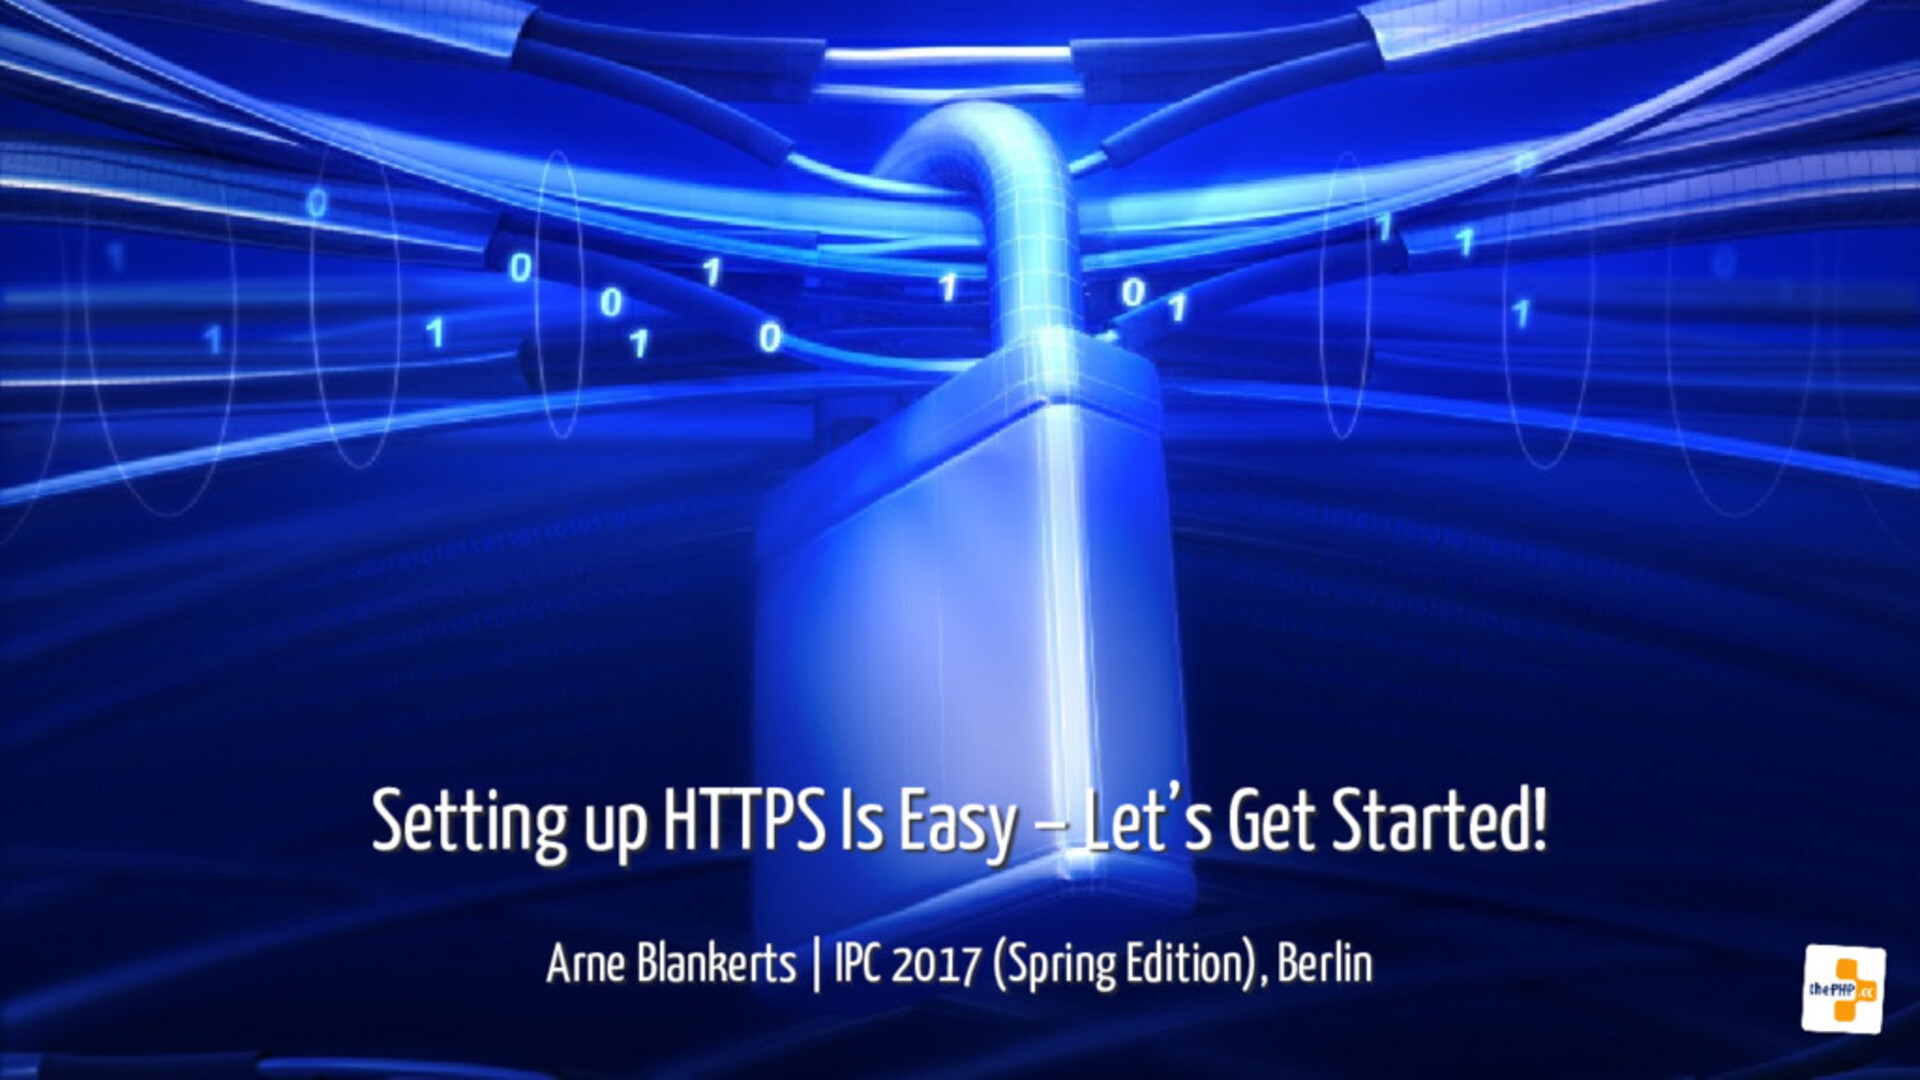 Setting up HTTPS is easy: what are you waiting for?